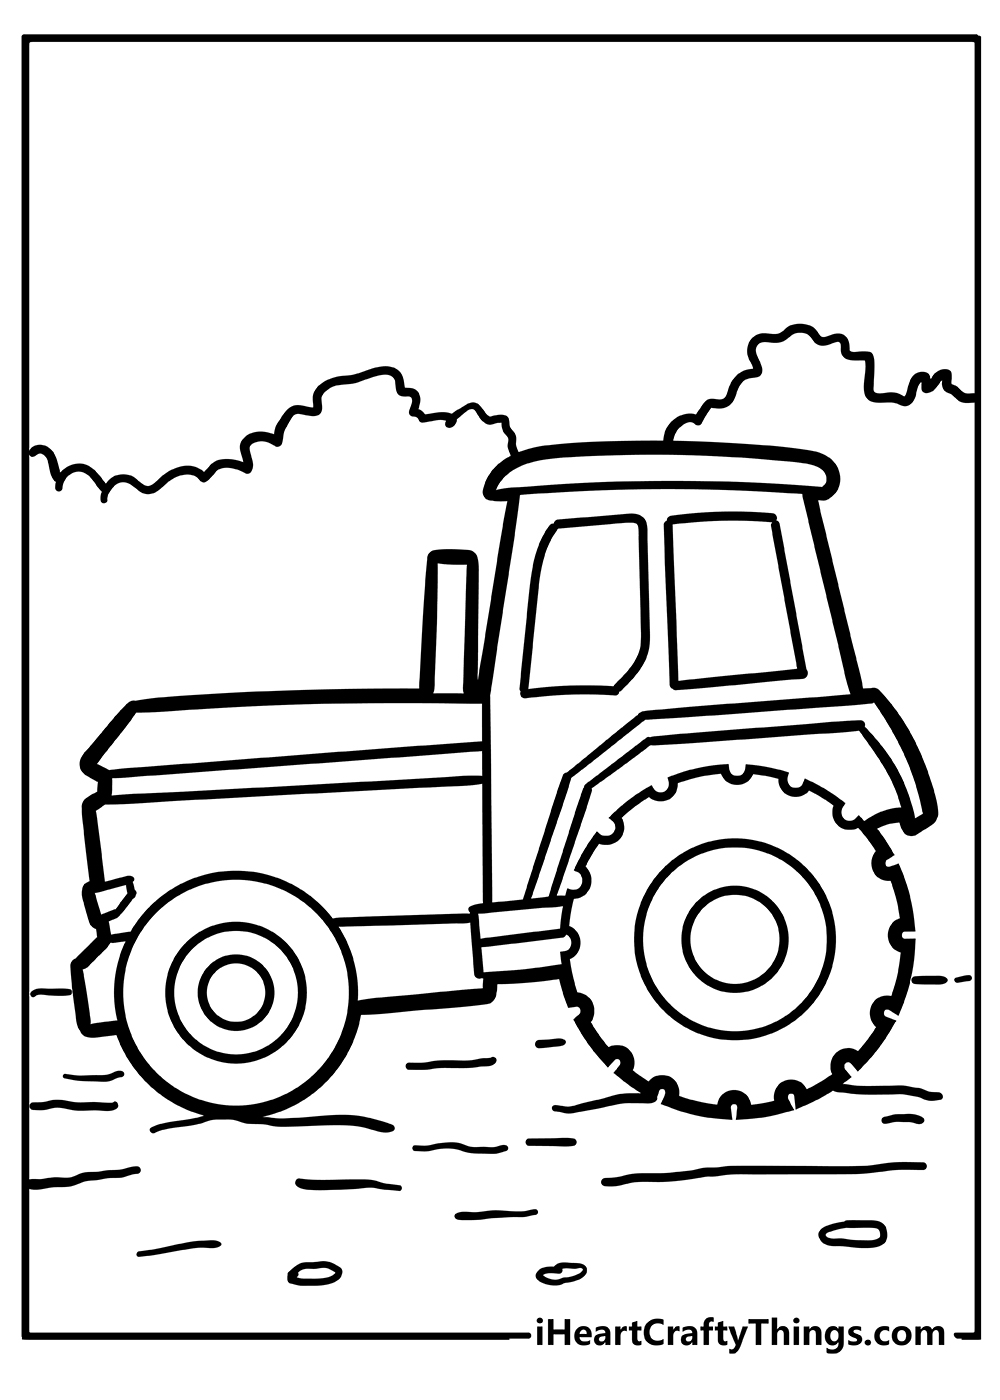 Tractor Coloring Original Sheet for children free download